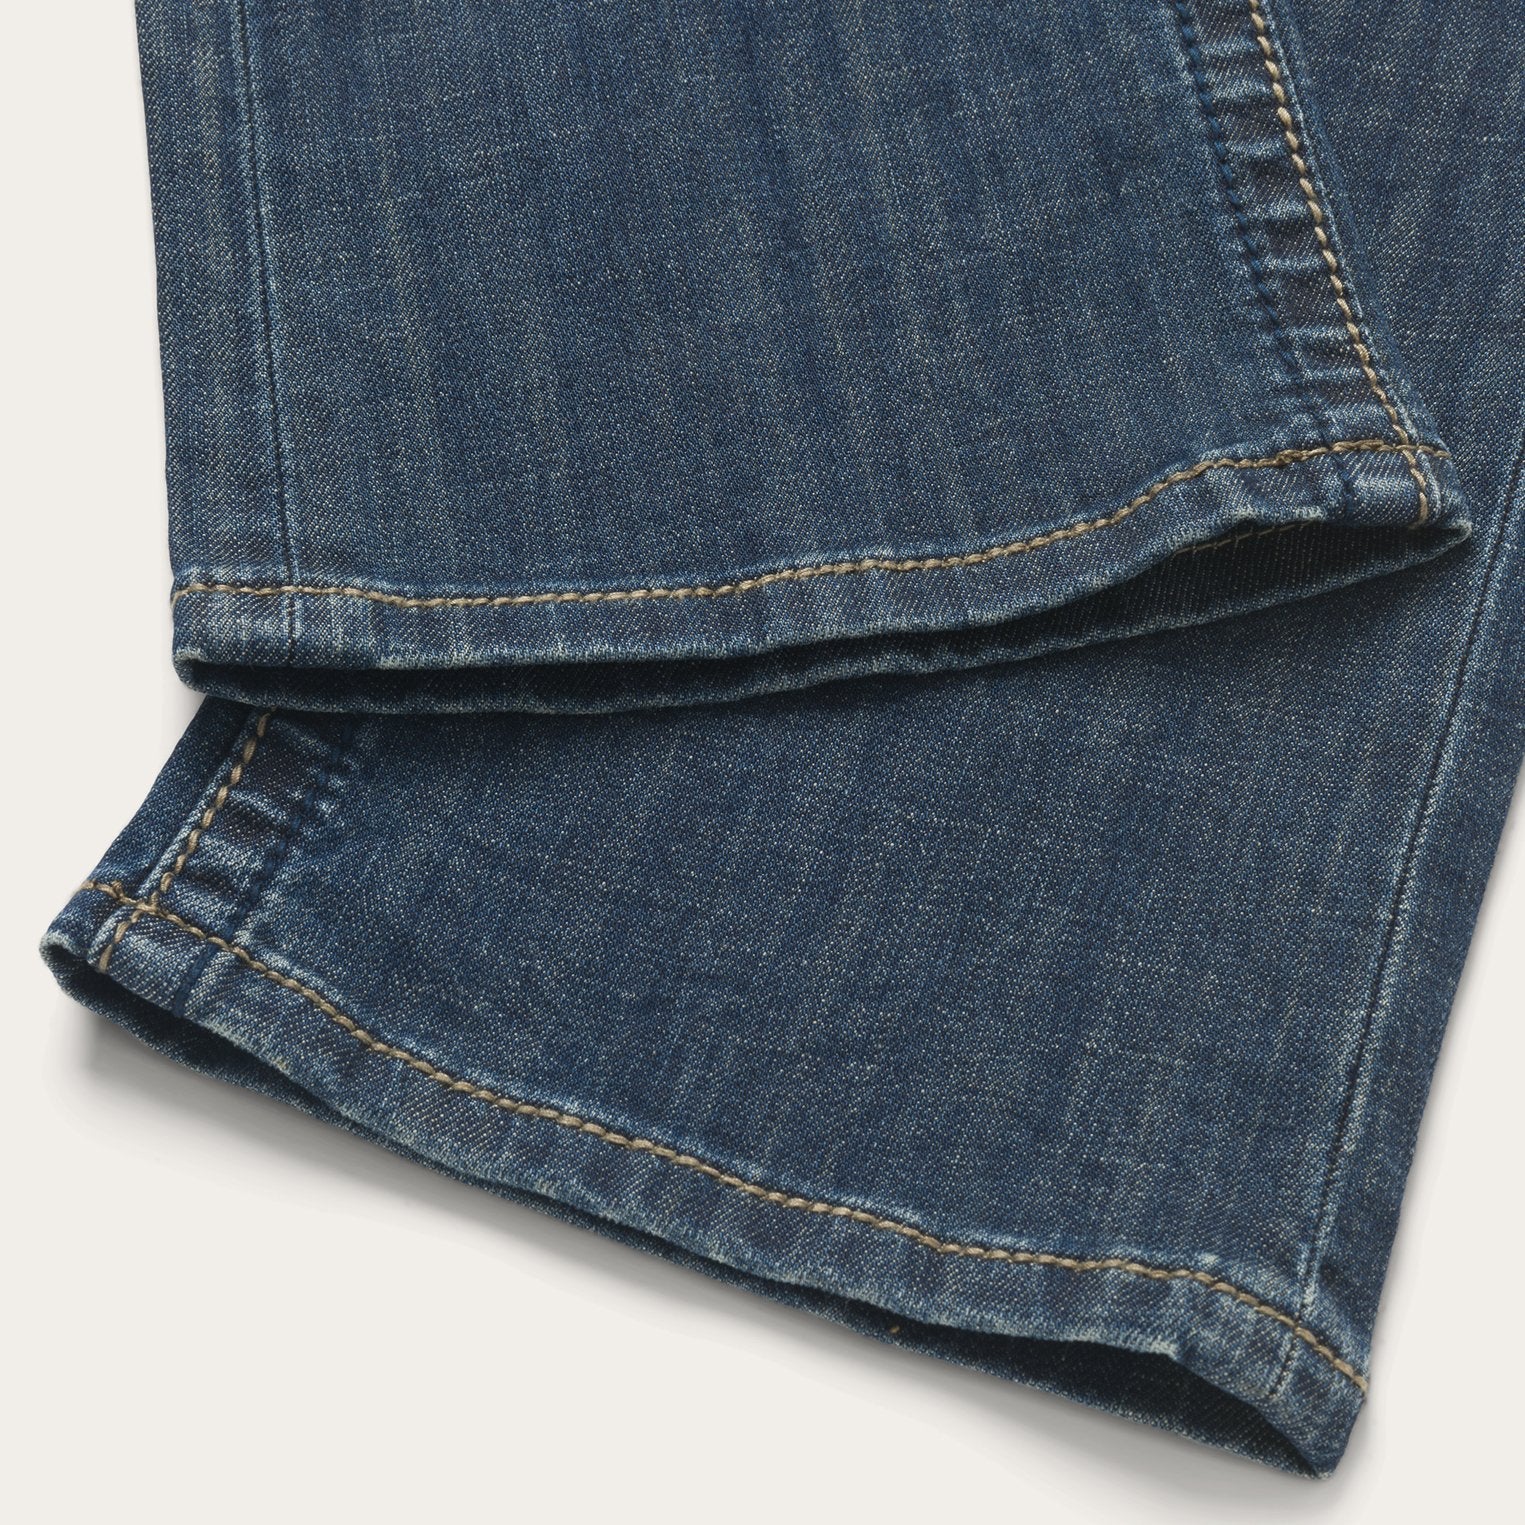 Stetson 818 Bootcut Jean With "S" Back Pocket